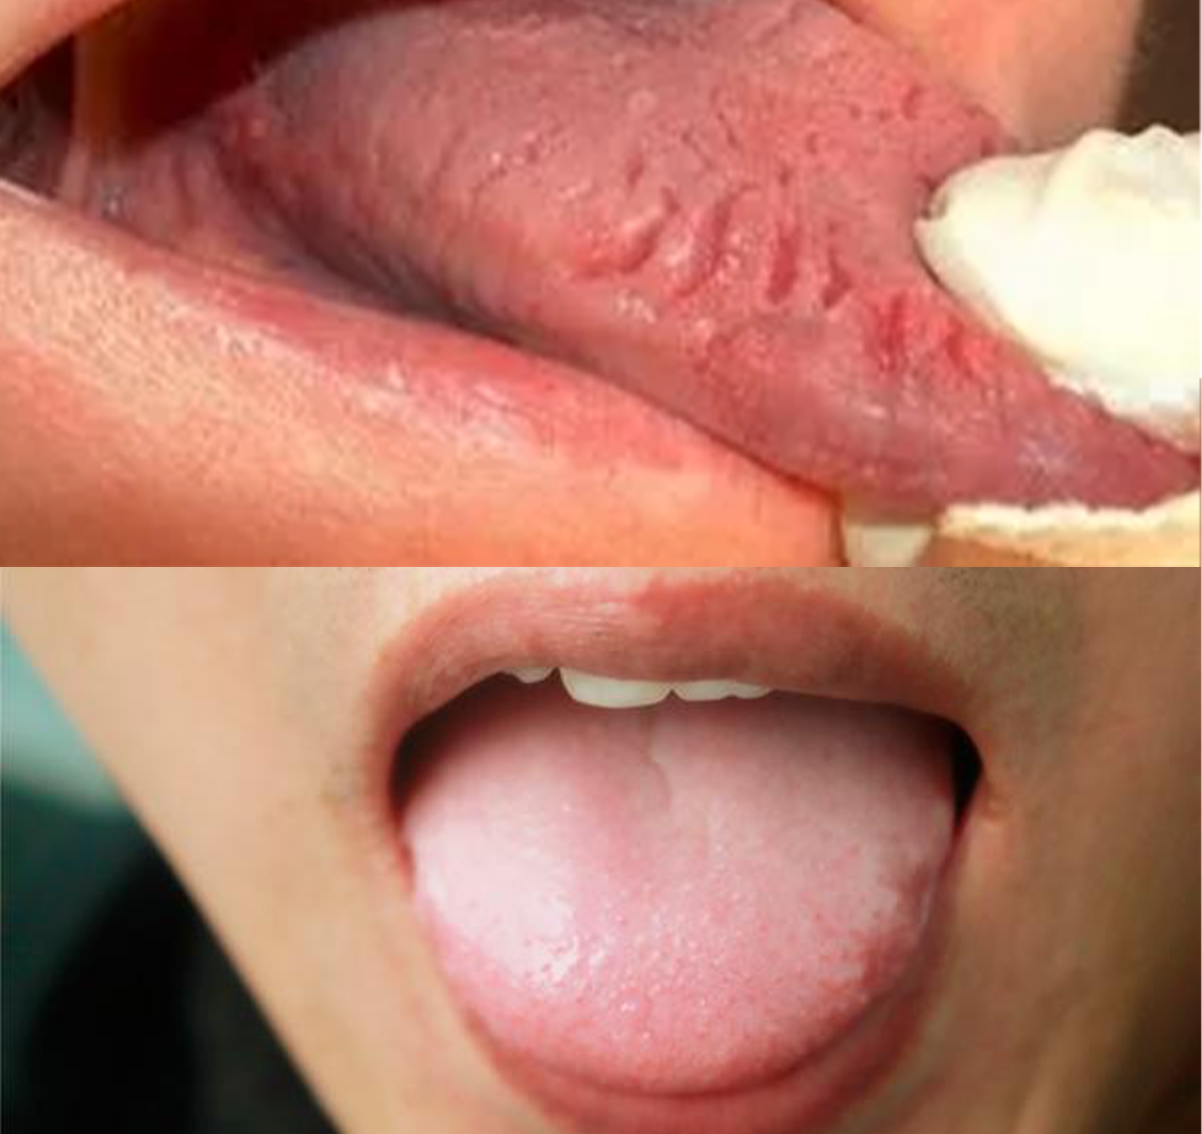 Mewing tongue chewing exercise before and after results